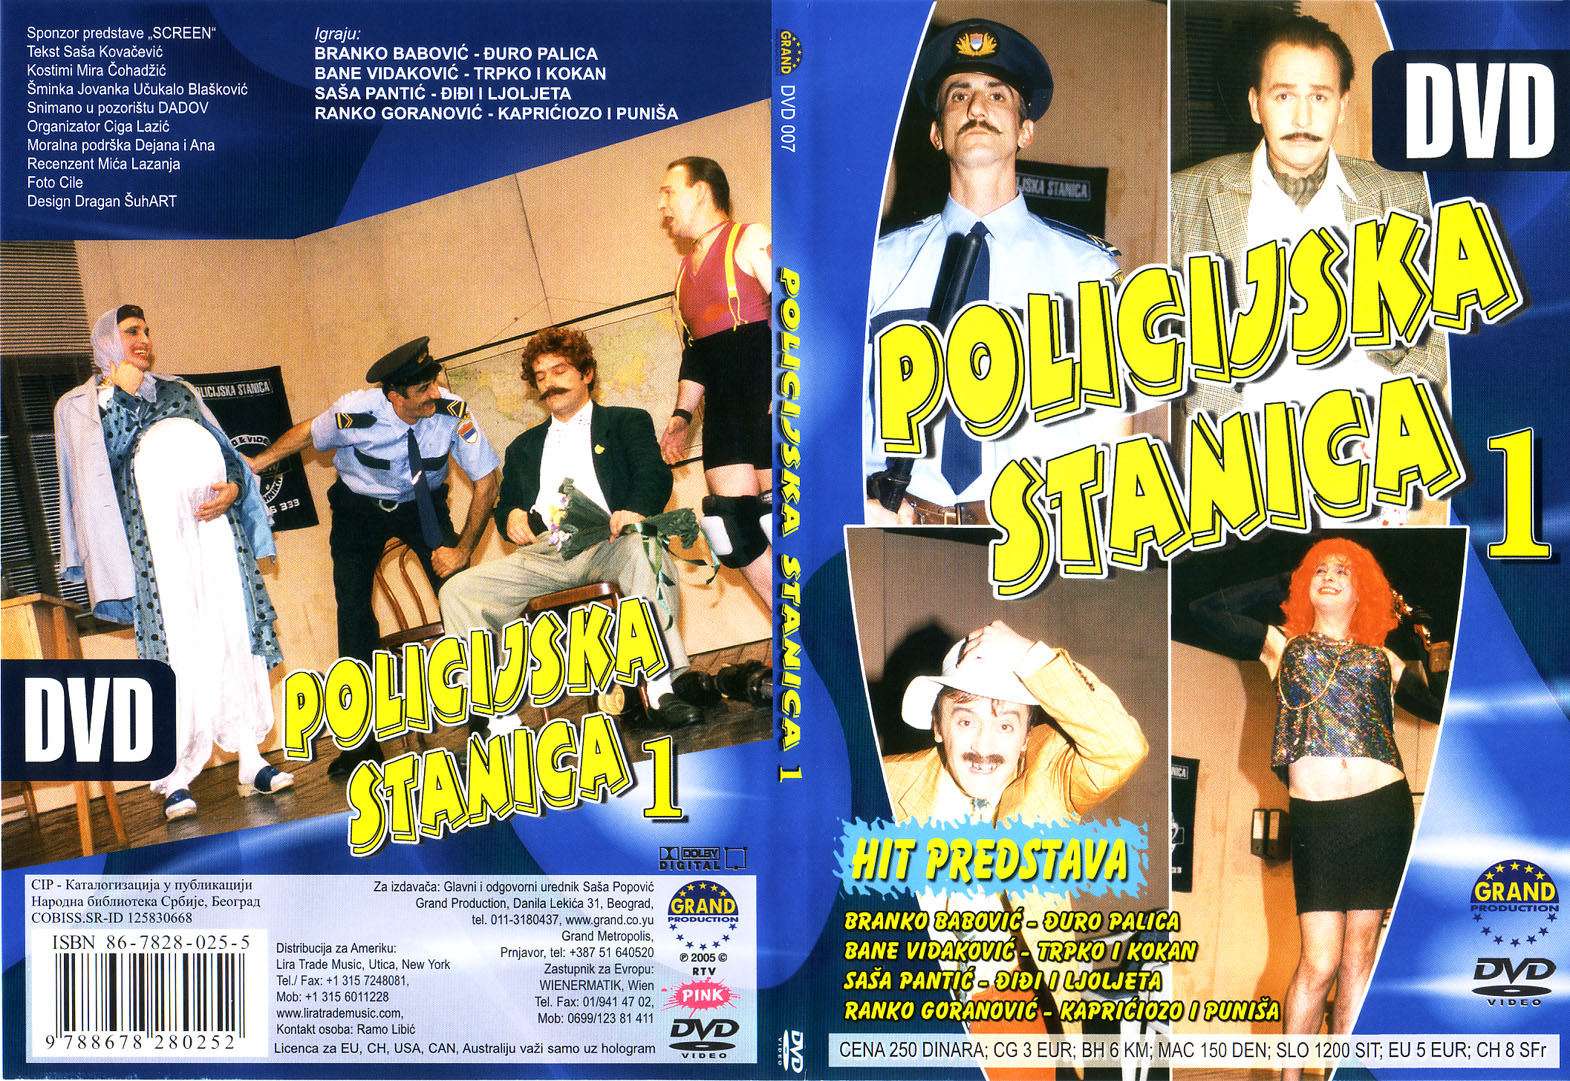 Click to view full size image -  DVD Cover - P - DVD - POLICIJSKA STANICA 1 - DVD - POLICIJSKA STANICA 1.jpg